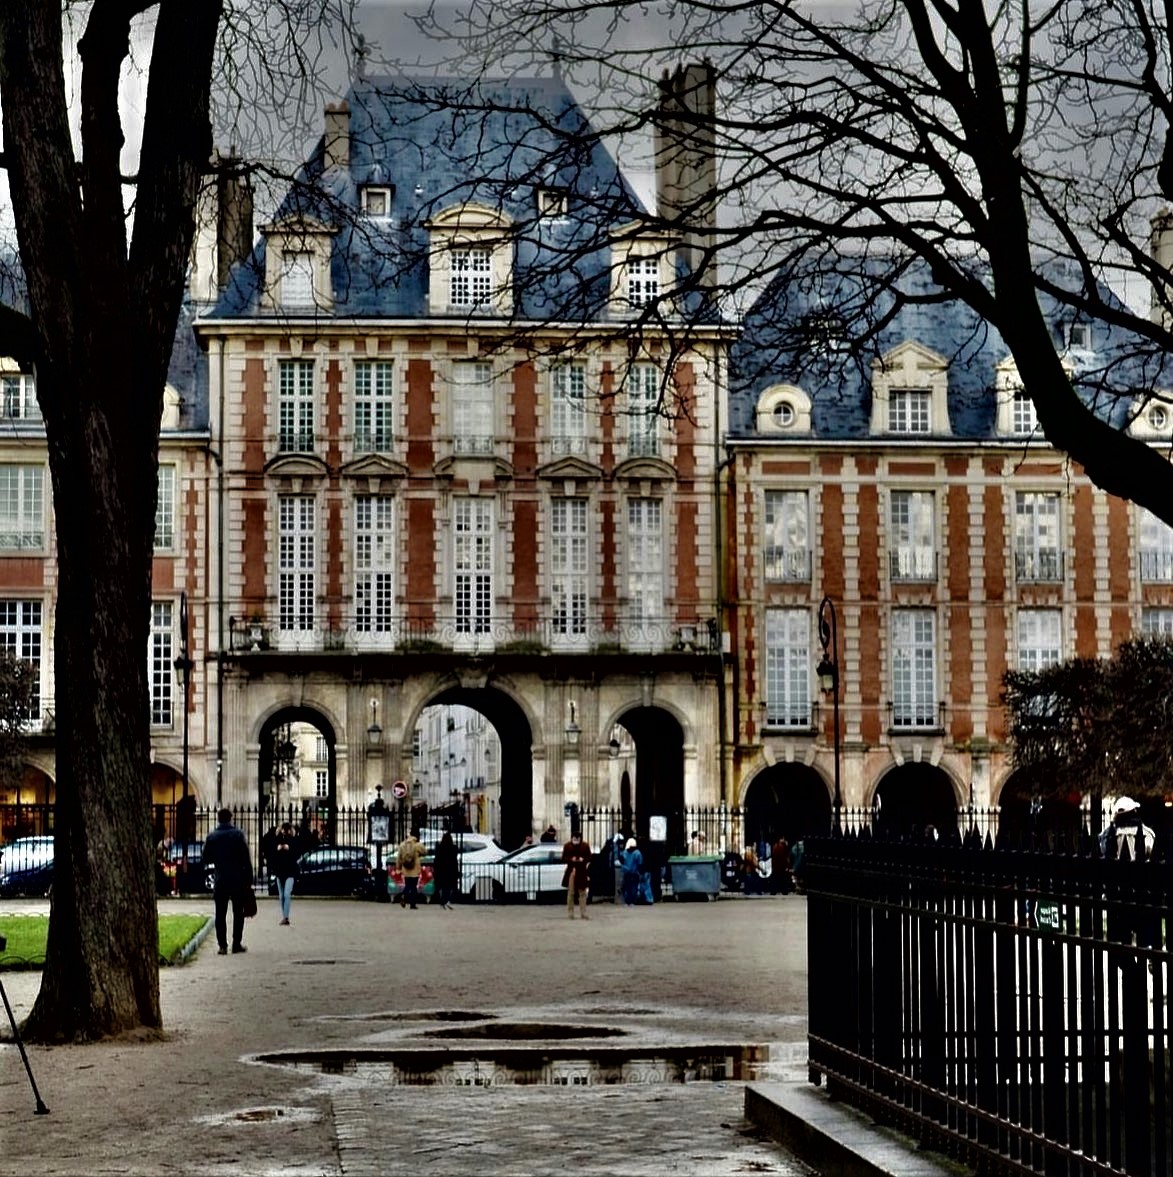 Wednesday for the windows of Paris...looking onto a wet Place des Vosges. 📷@barthi75 #Wednesdayforwindows #Paris #France #architecture #architecturephotography